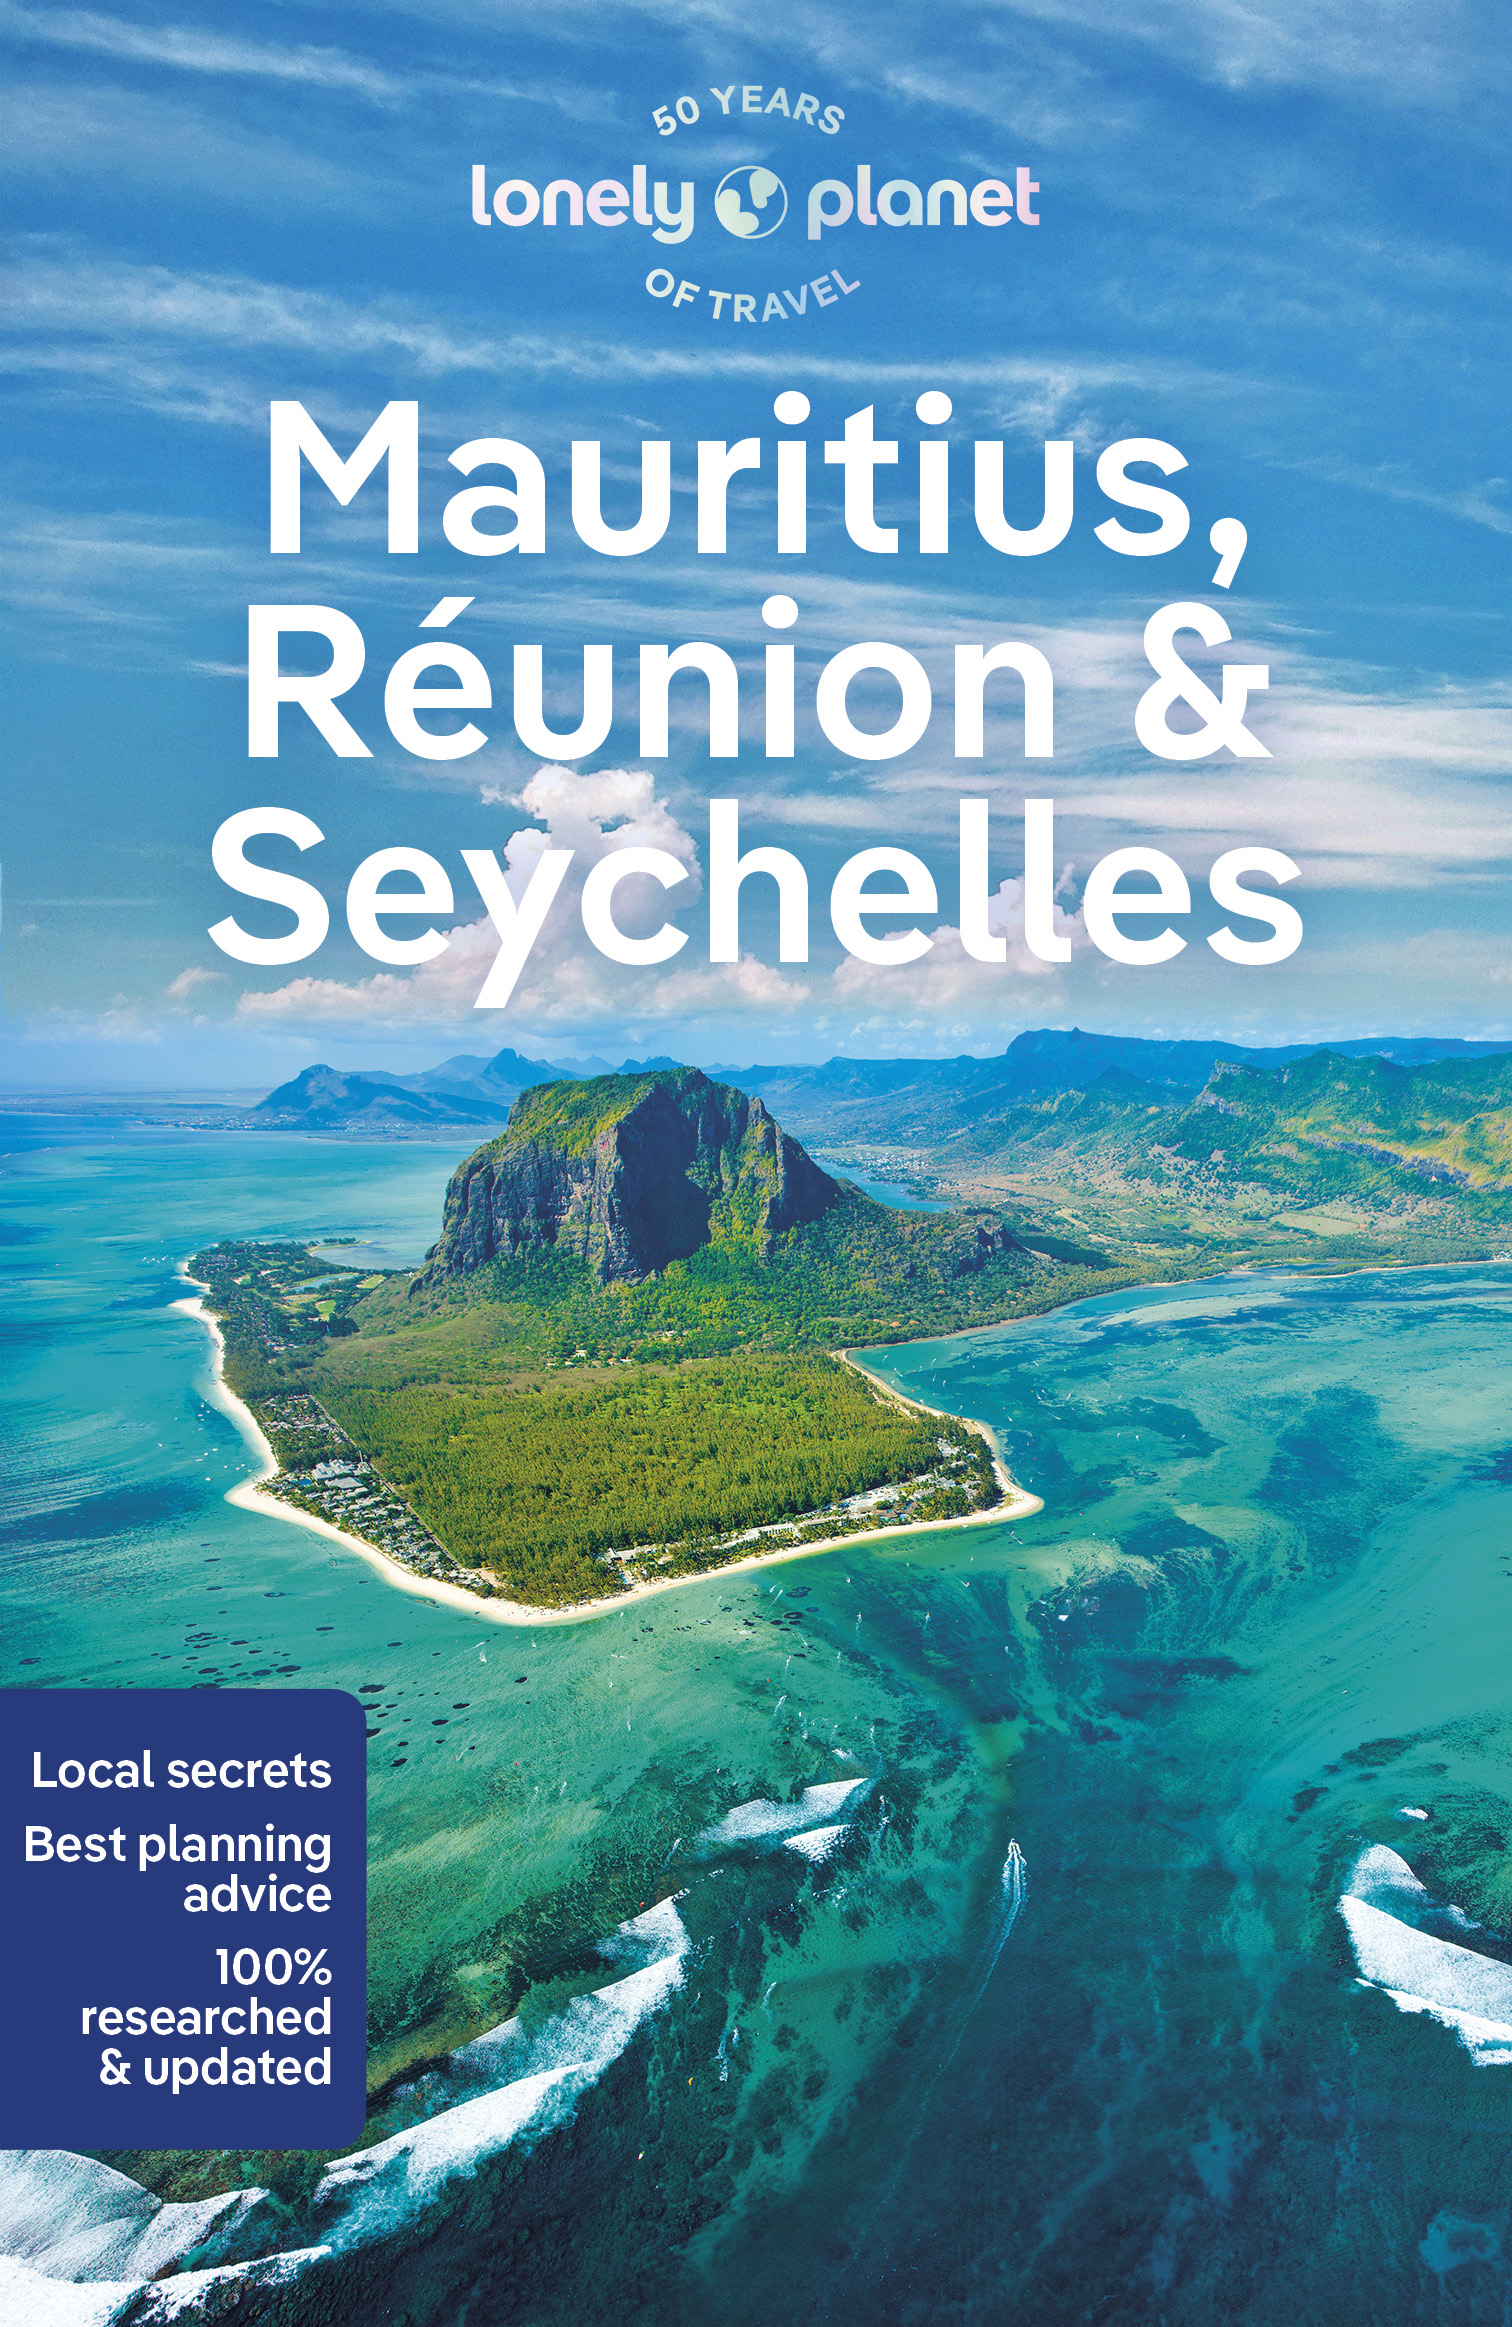 Lonely Planet průvodce Mauritius,Reunion,Seychelles 11.edice anglicky Lonely